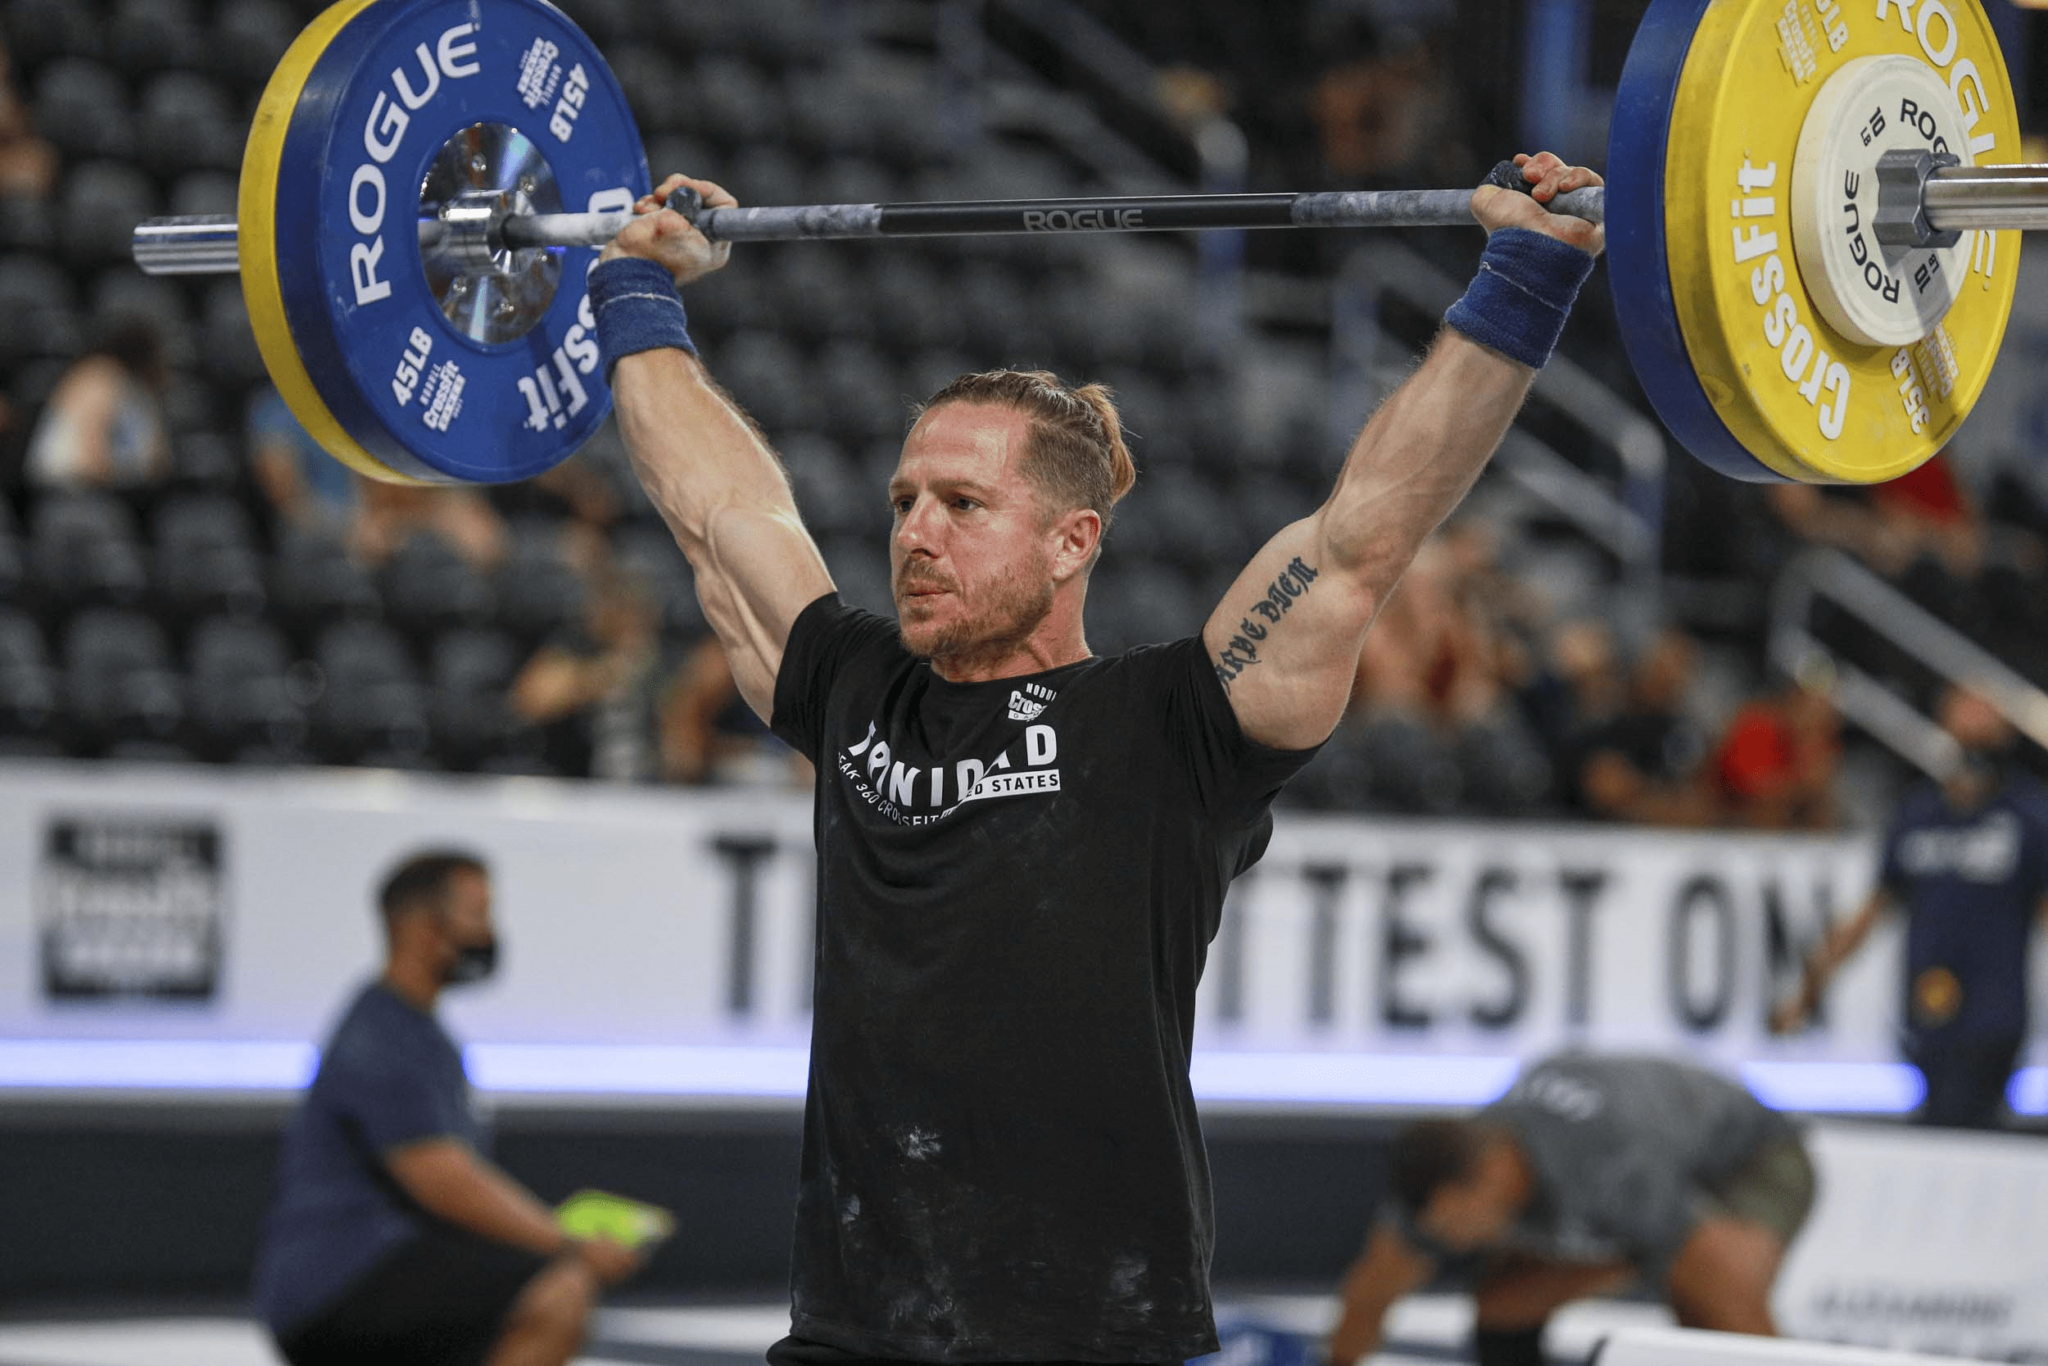 First CrossFit Age Group Semifinals Over, Unofficial Results and